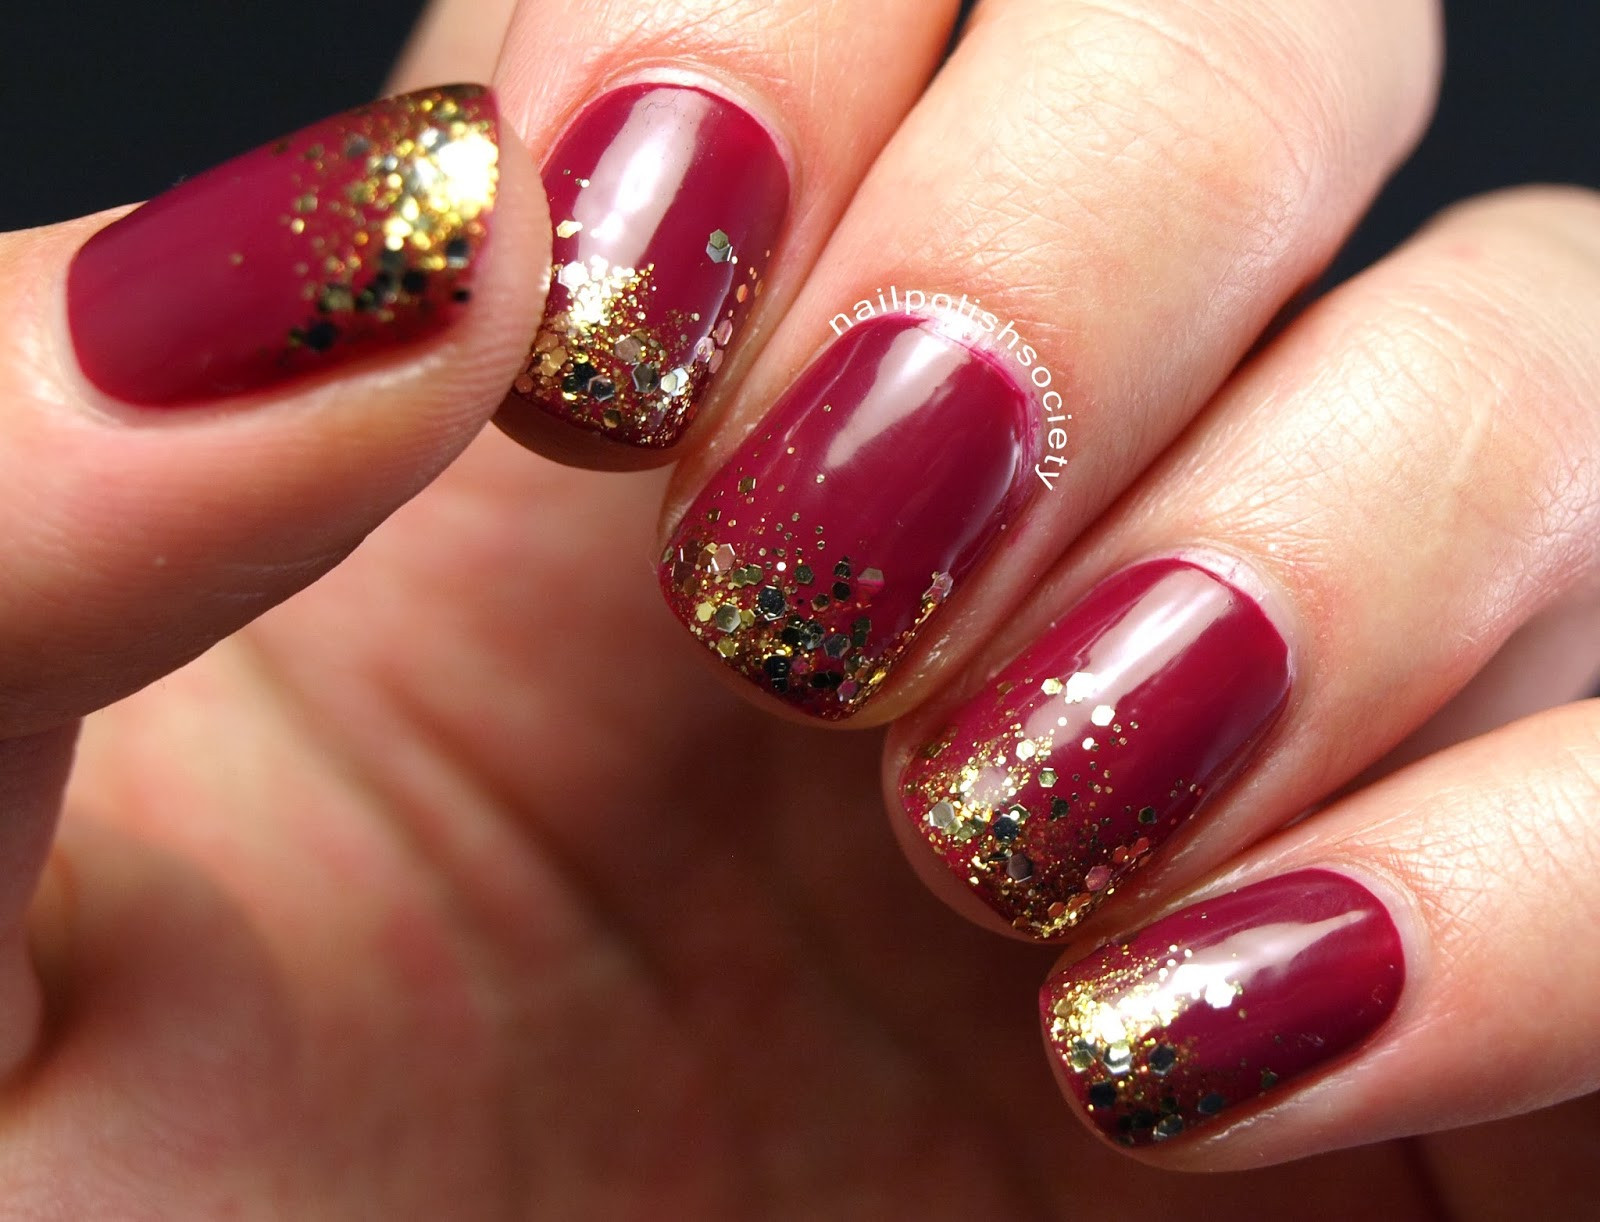 2. "Trendy Holiday Nail Colors to Try This Season" - wide 8